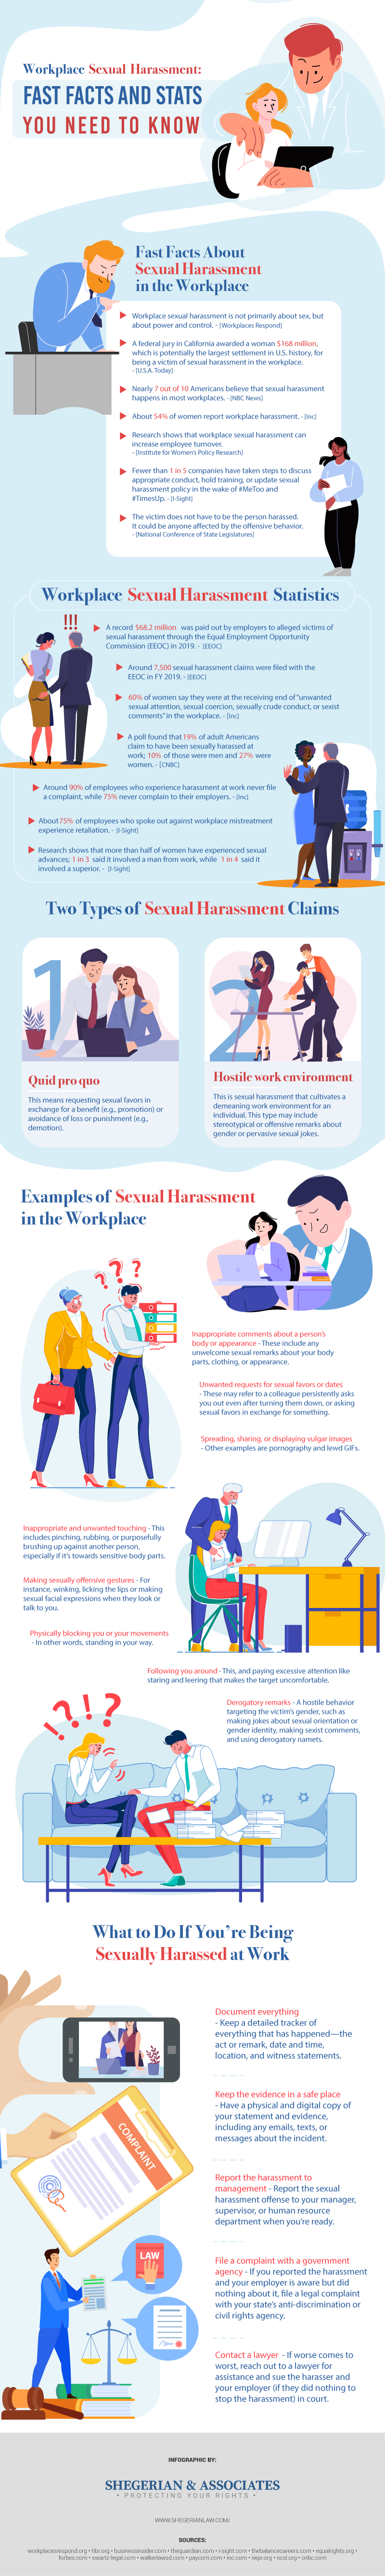 Sherigan & Associates reveal significant statistics and facts on the prevalence of sexual harassment in the workplace